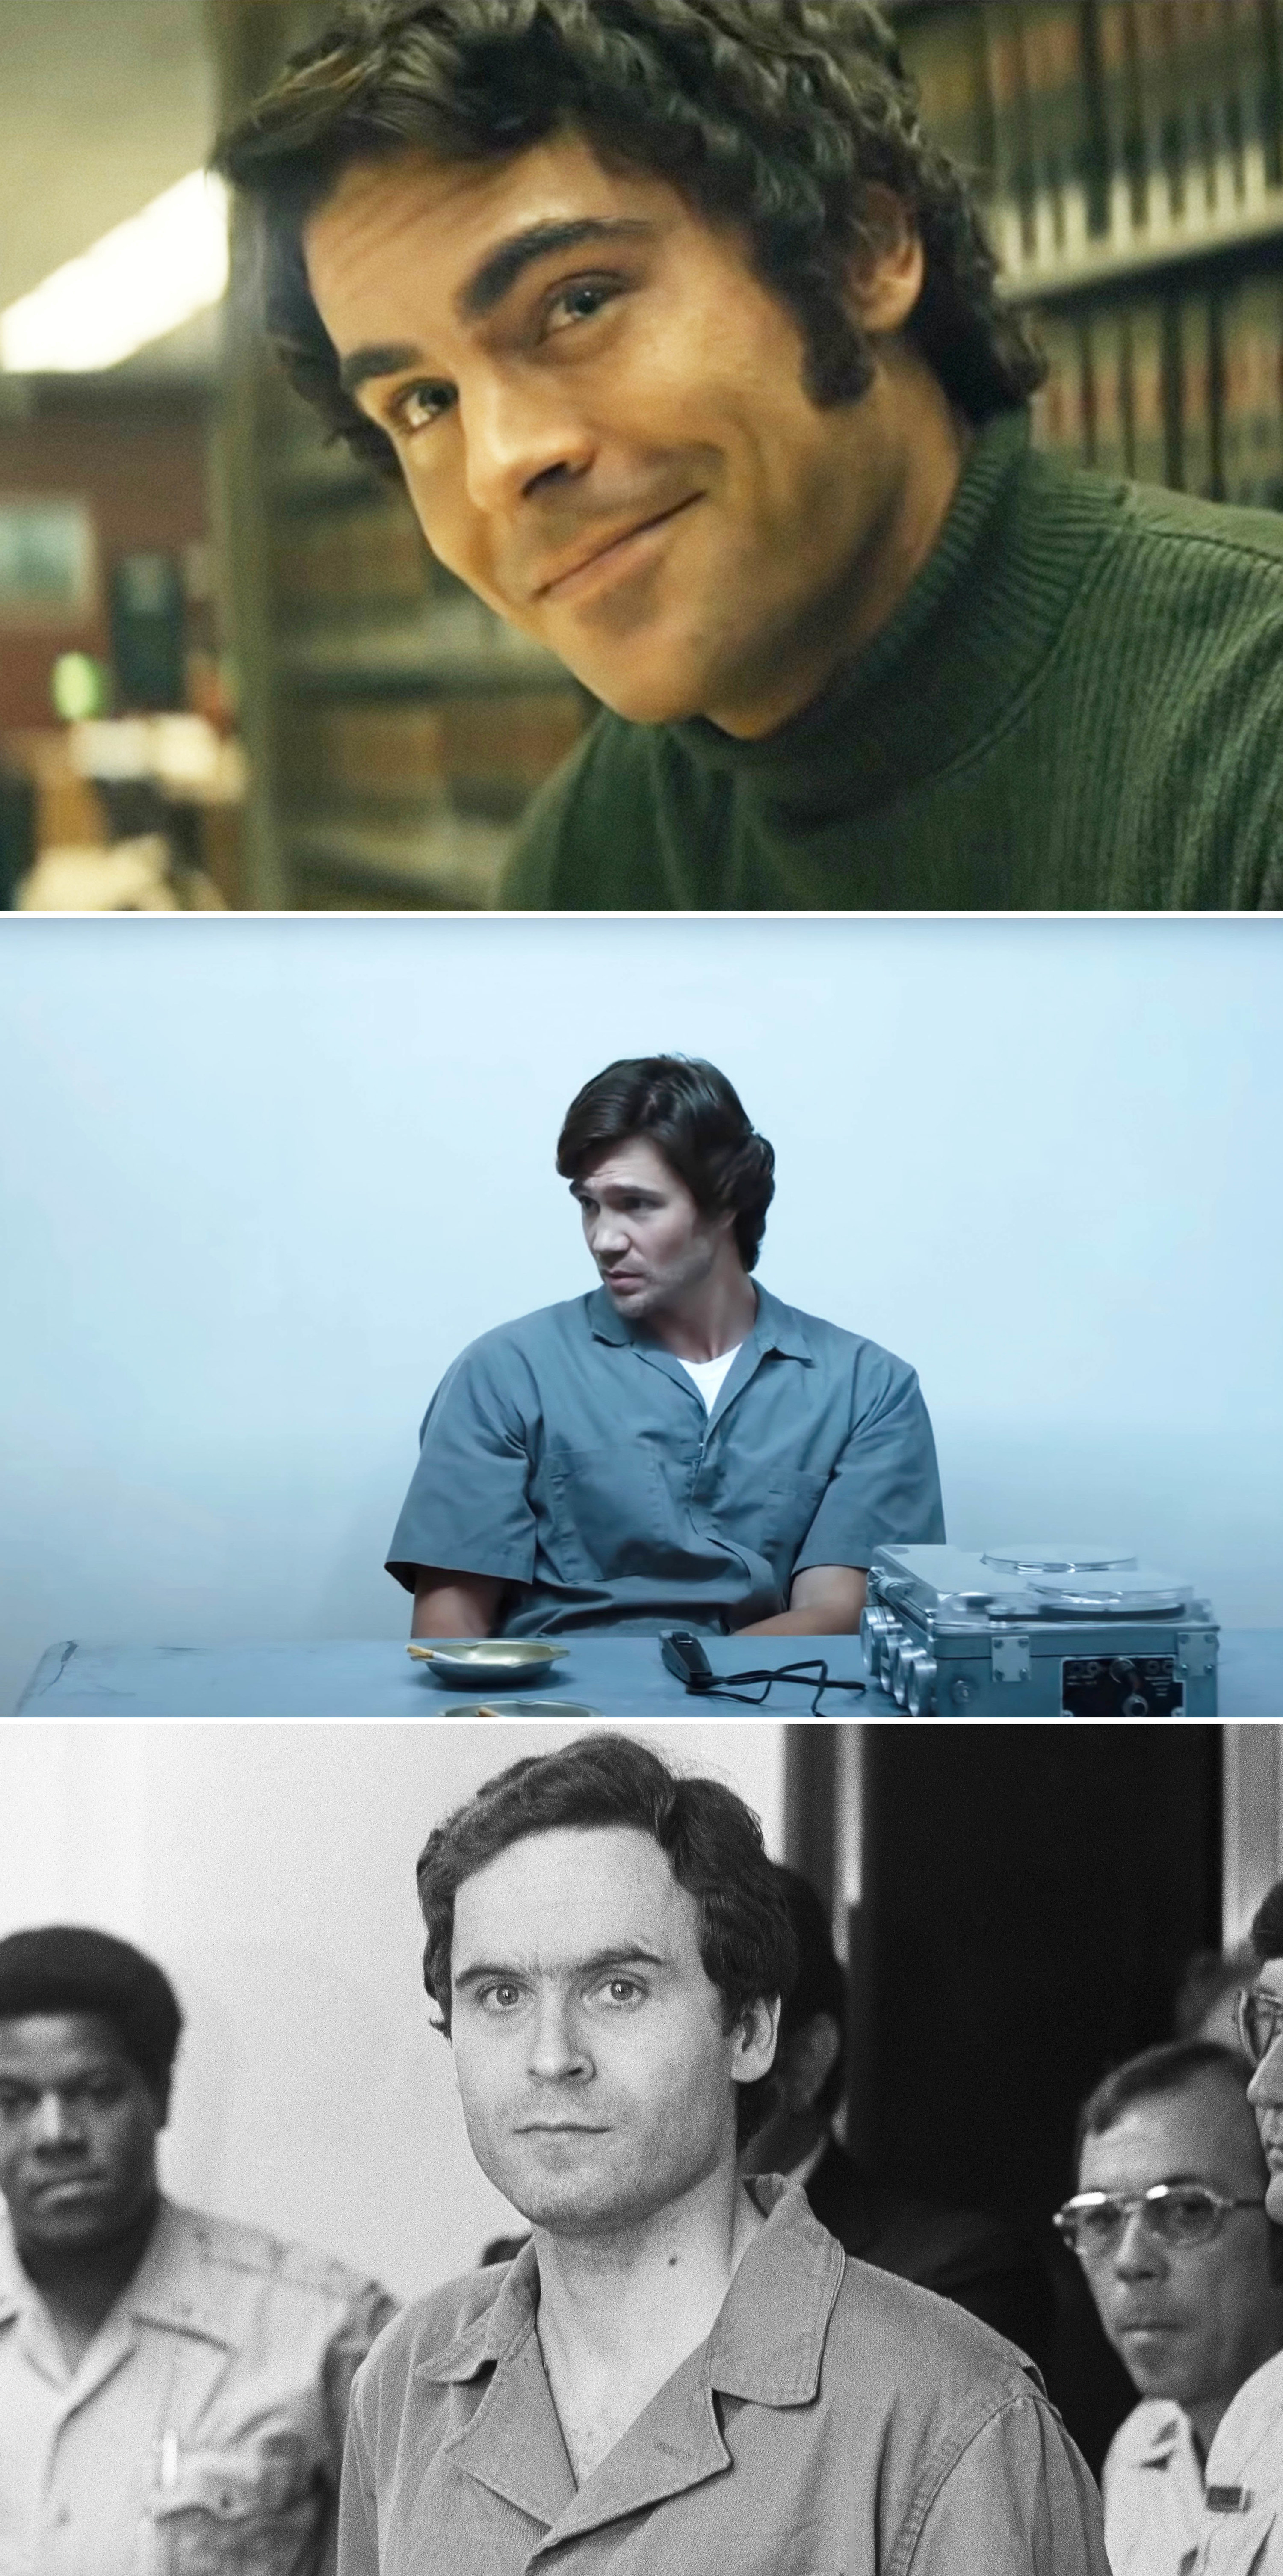 Side-by-sides of Zac Efron, Chad Michael Murray, and Ted Bundy